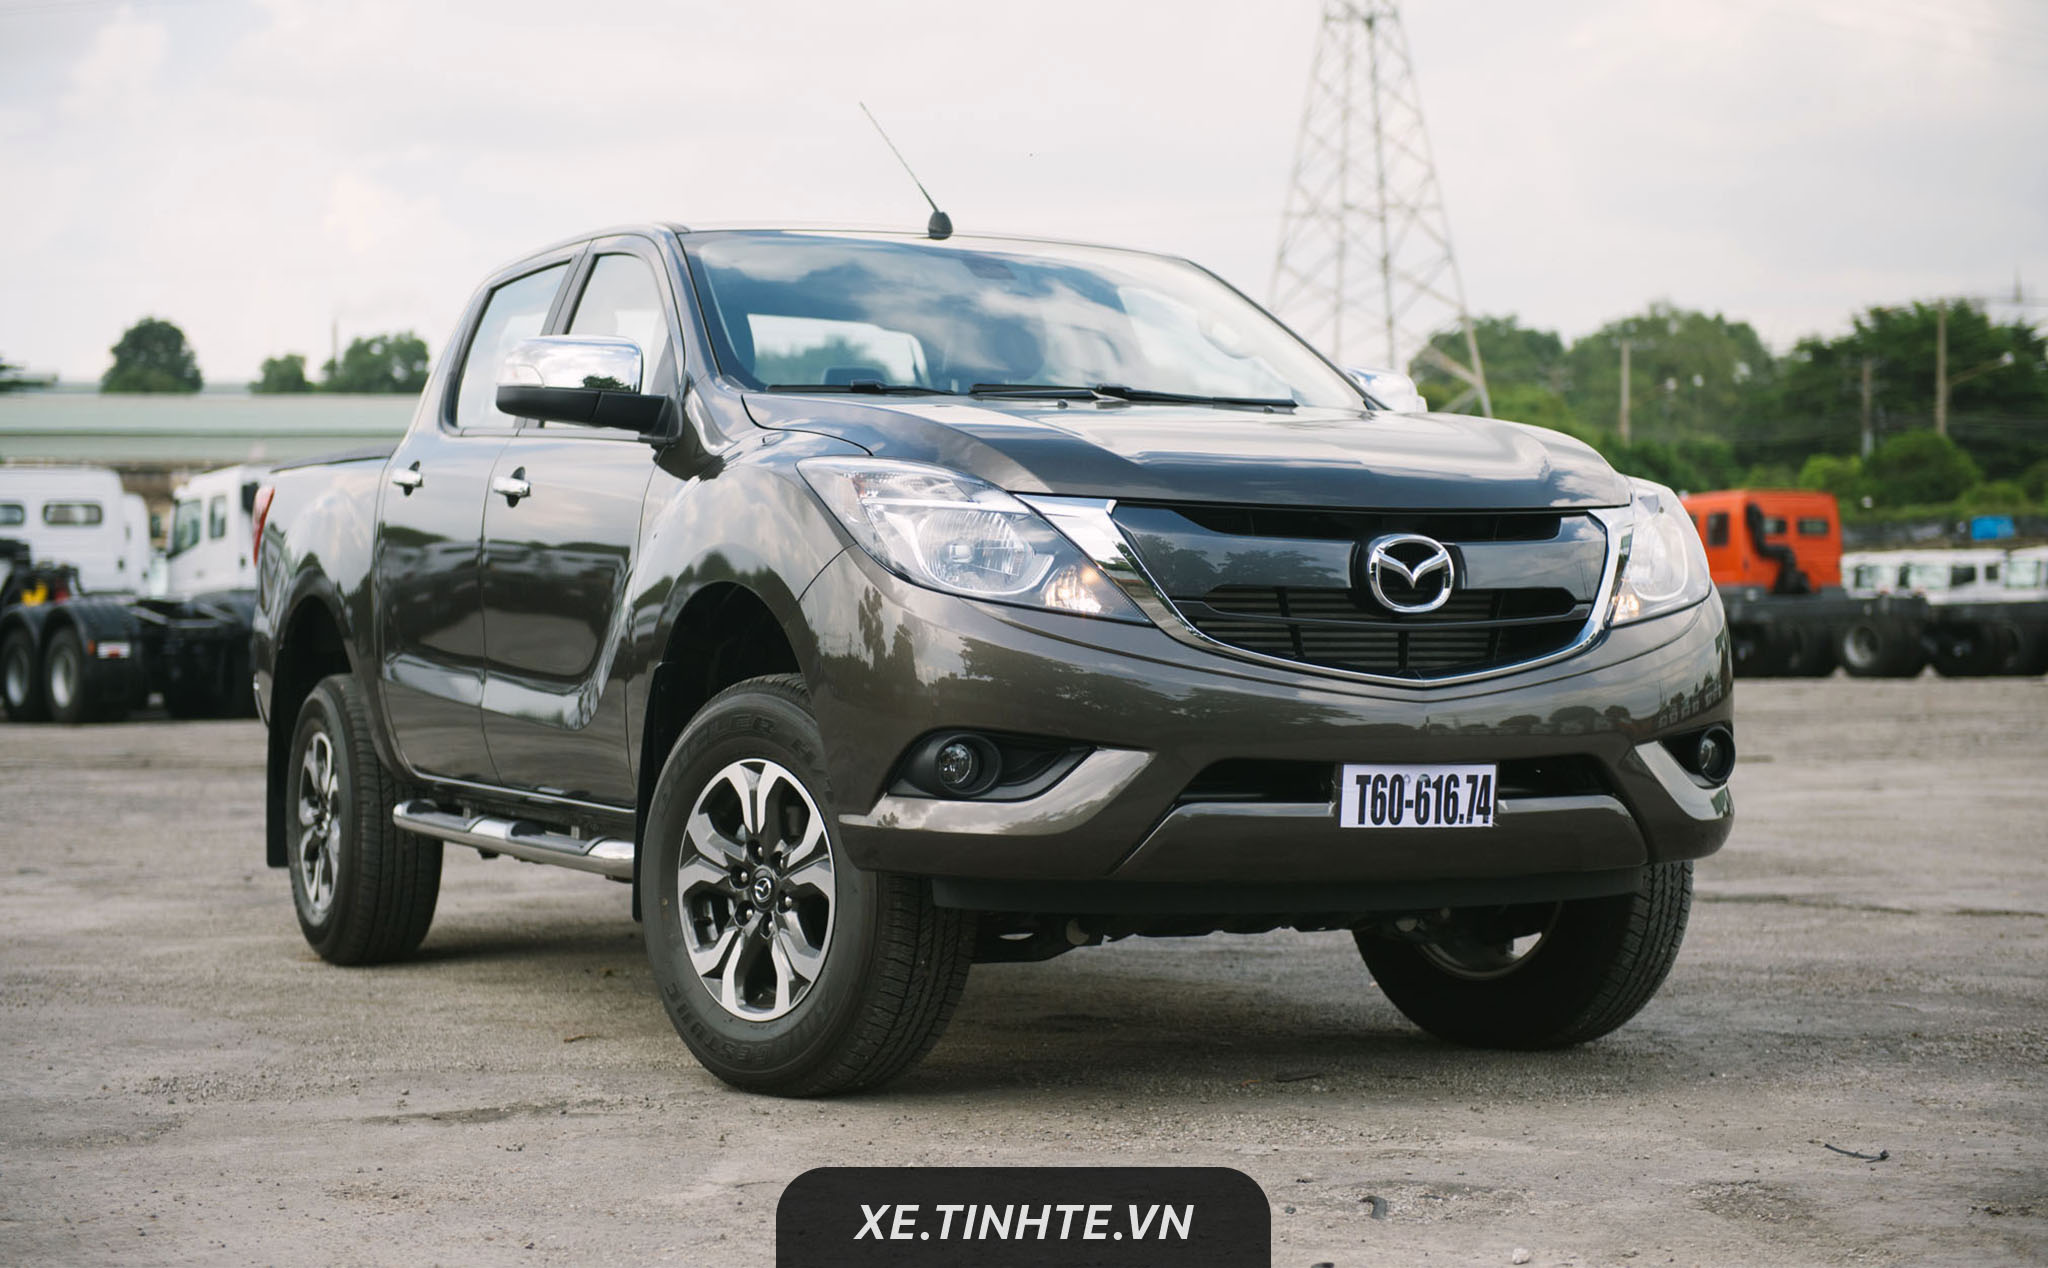 2017 Mazda BT50 GT 4x4 dual cab utility Specifications  CarExpert